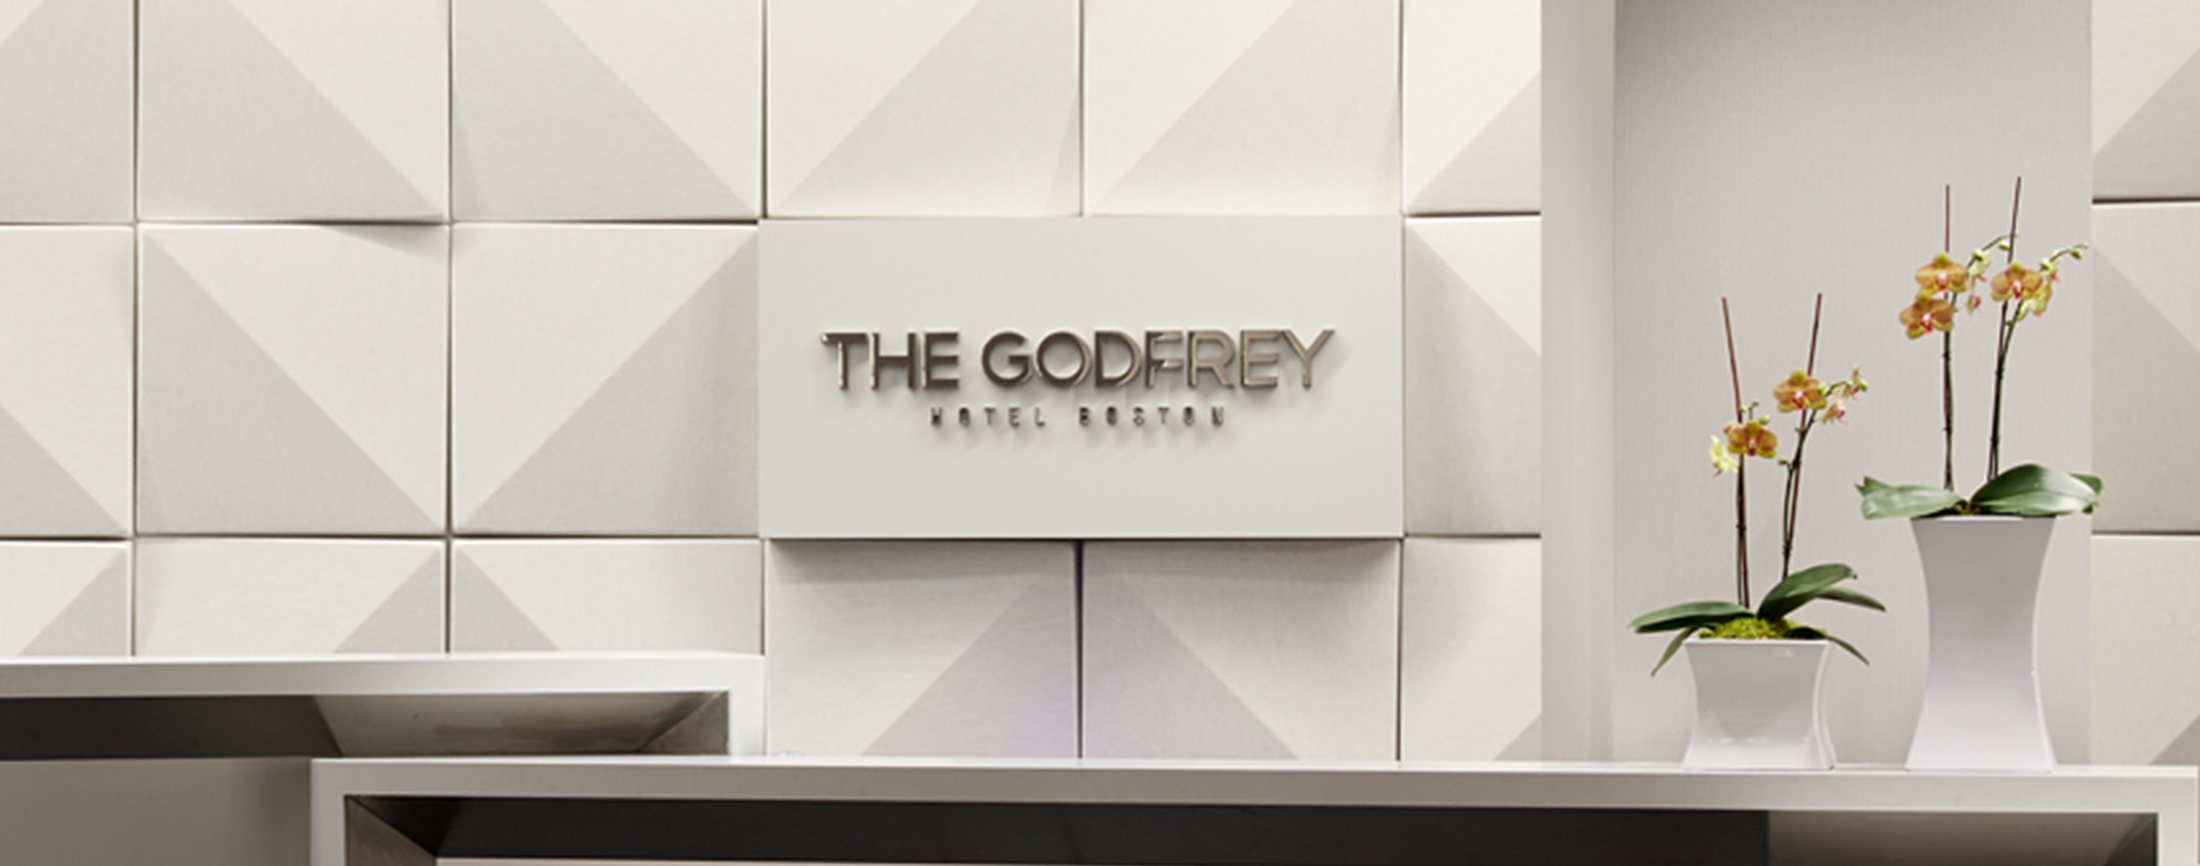 Cafe and Restaurants Now Open at the New Godfrey Hotel